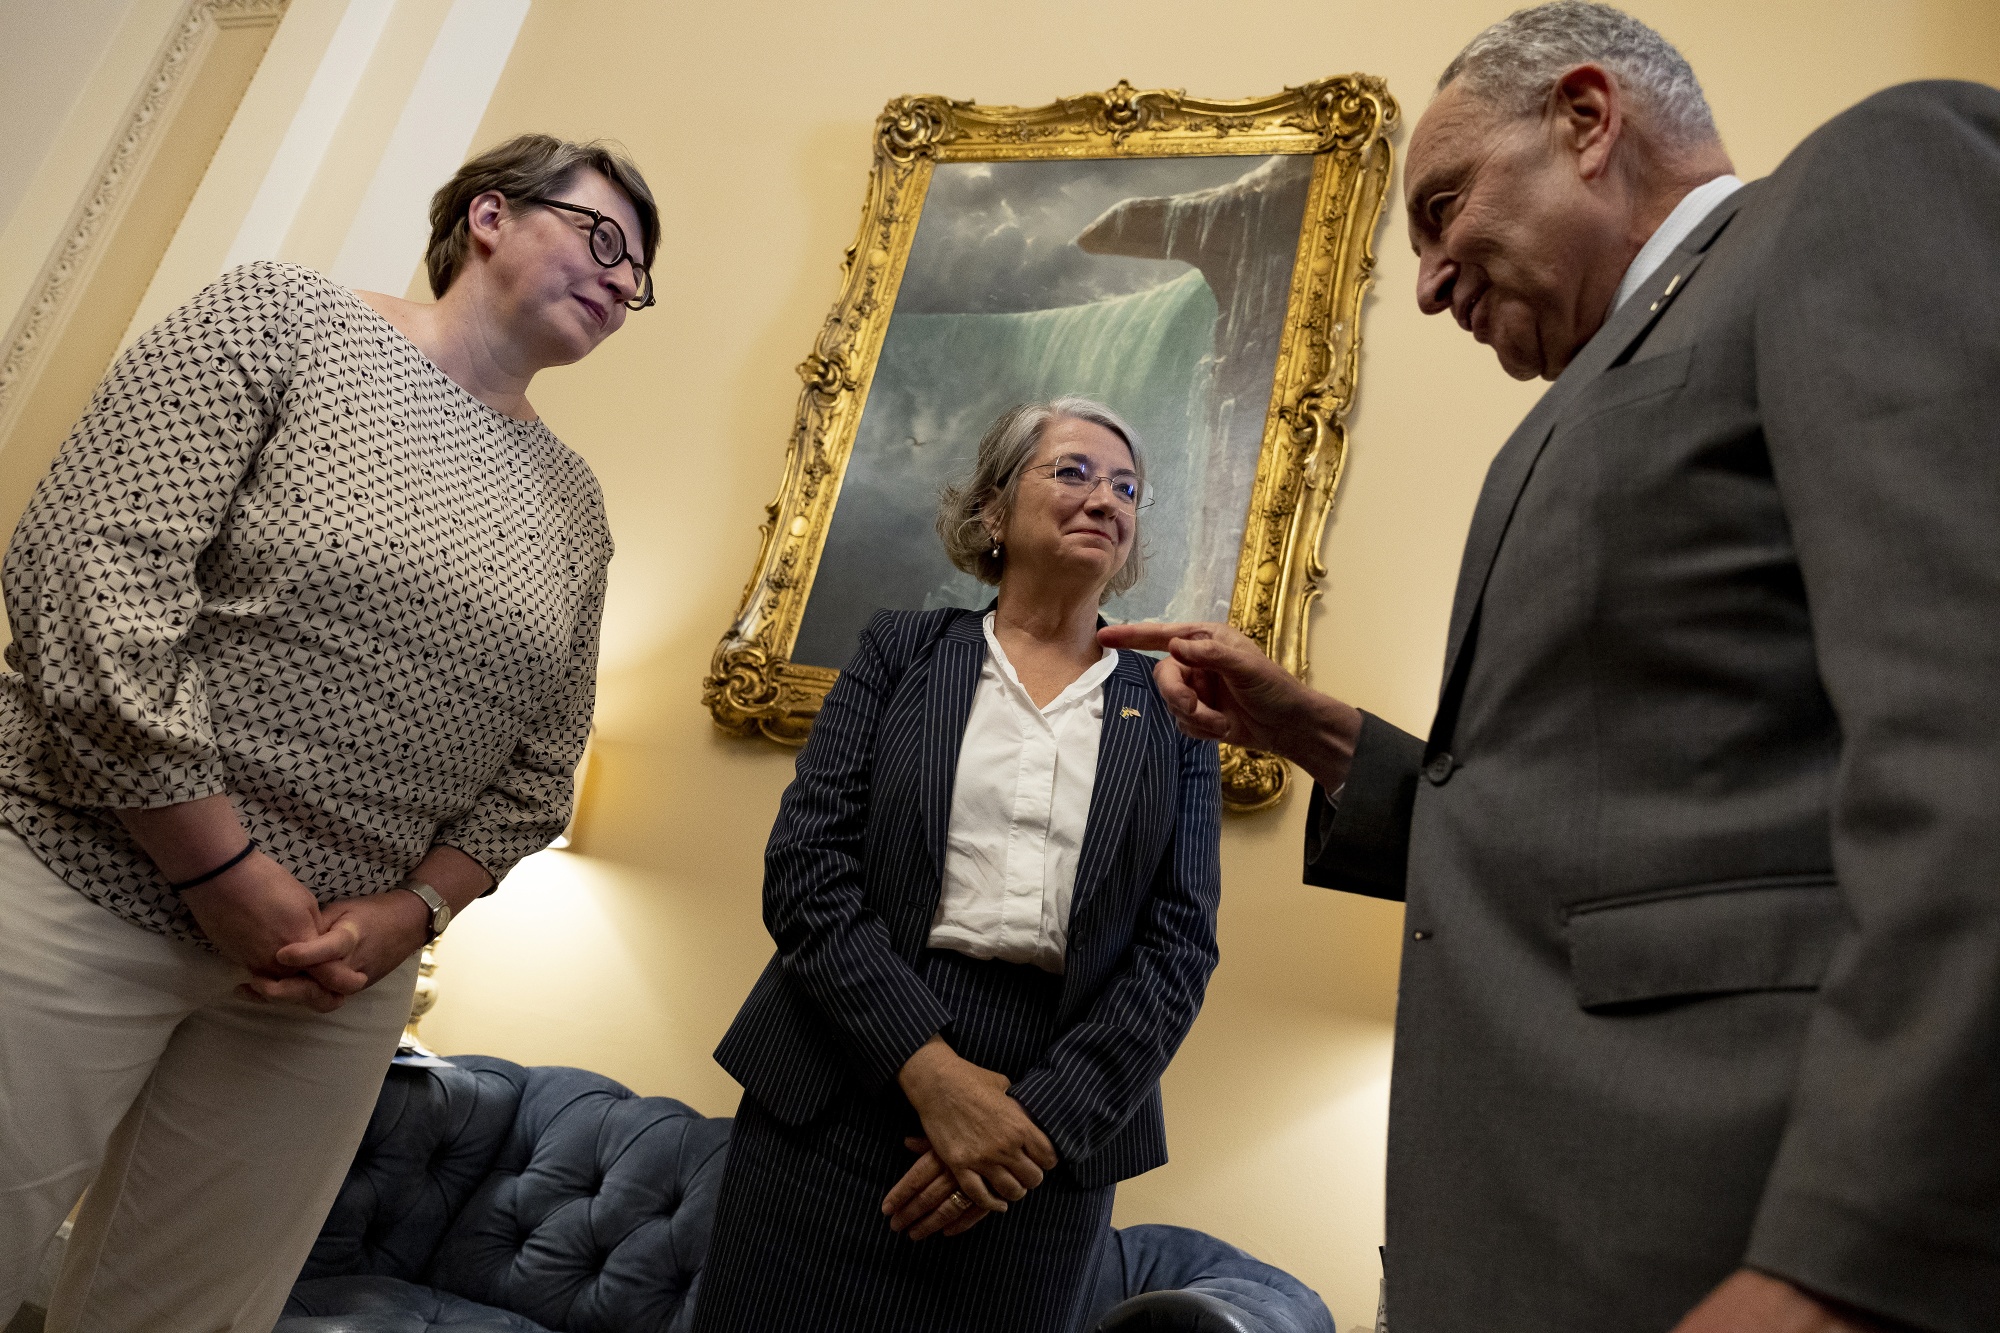 Chuck Schumer, right, meets with Karin Olofsdotter, Sweden’s ambassador to the US, center,&nbsp;&nbsp;and Päivi Nevala, minister counselor of the Finnish Embassy,&nbsp;in Washington D.C. on Aug. 3.